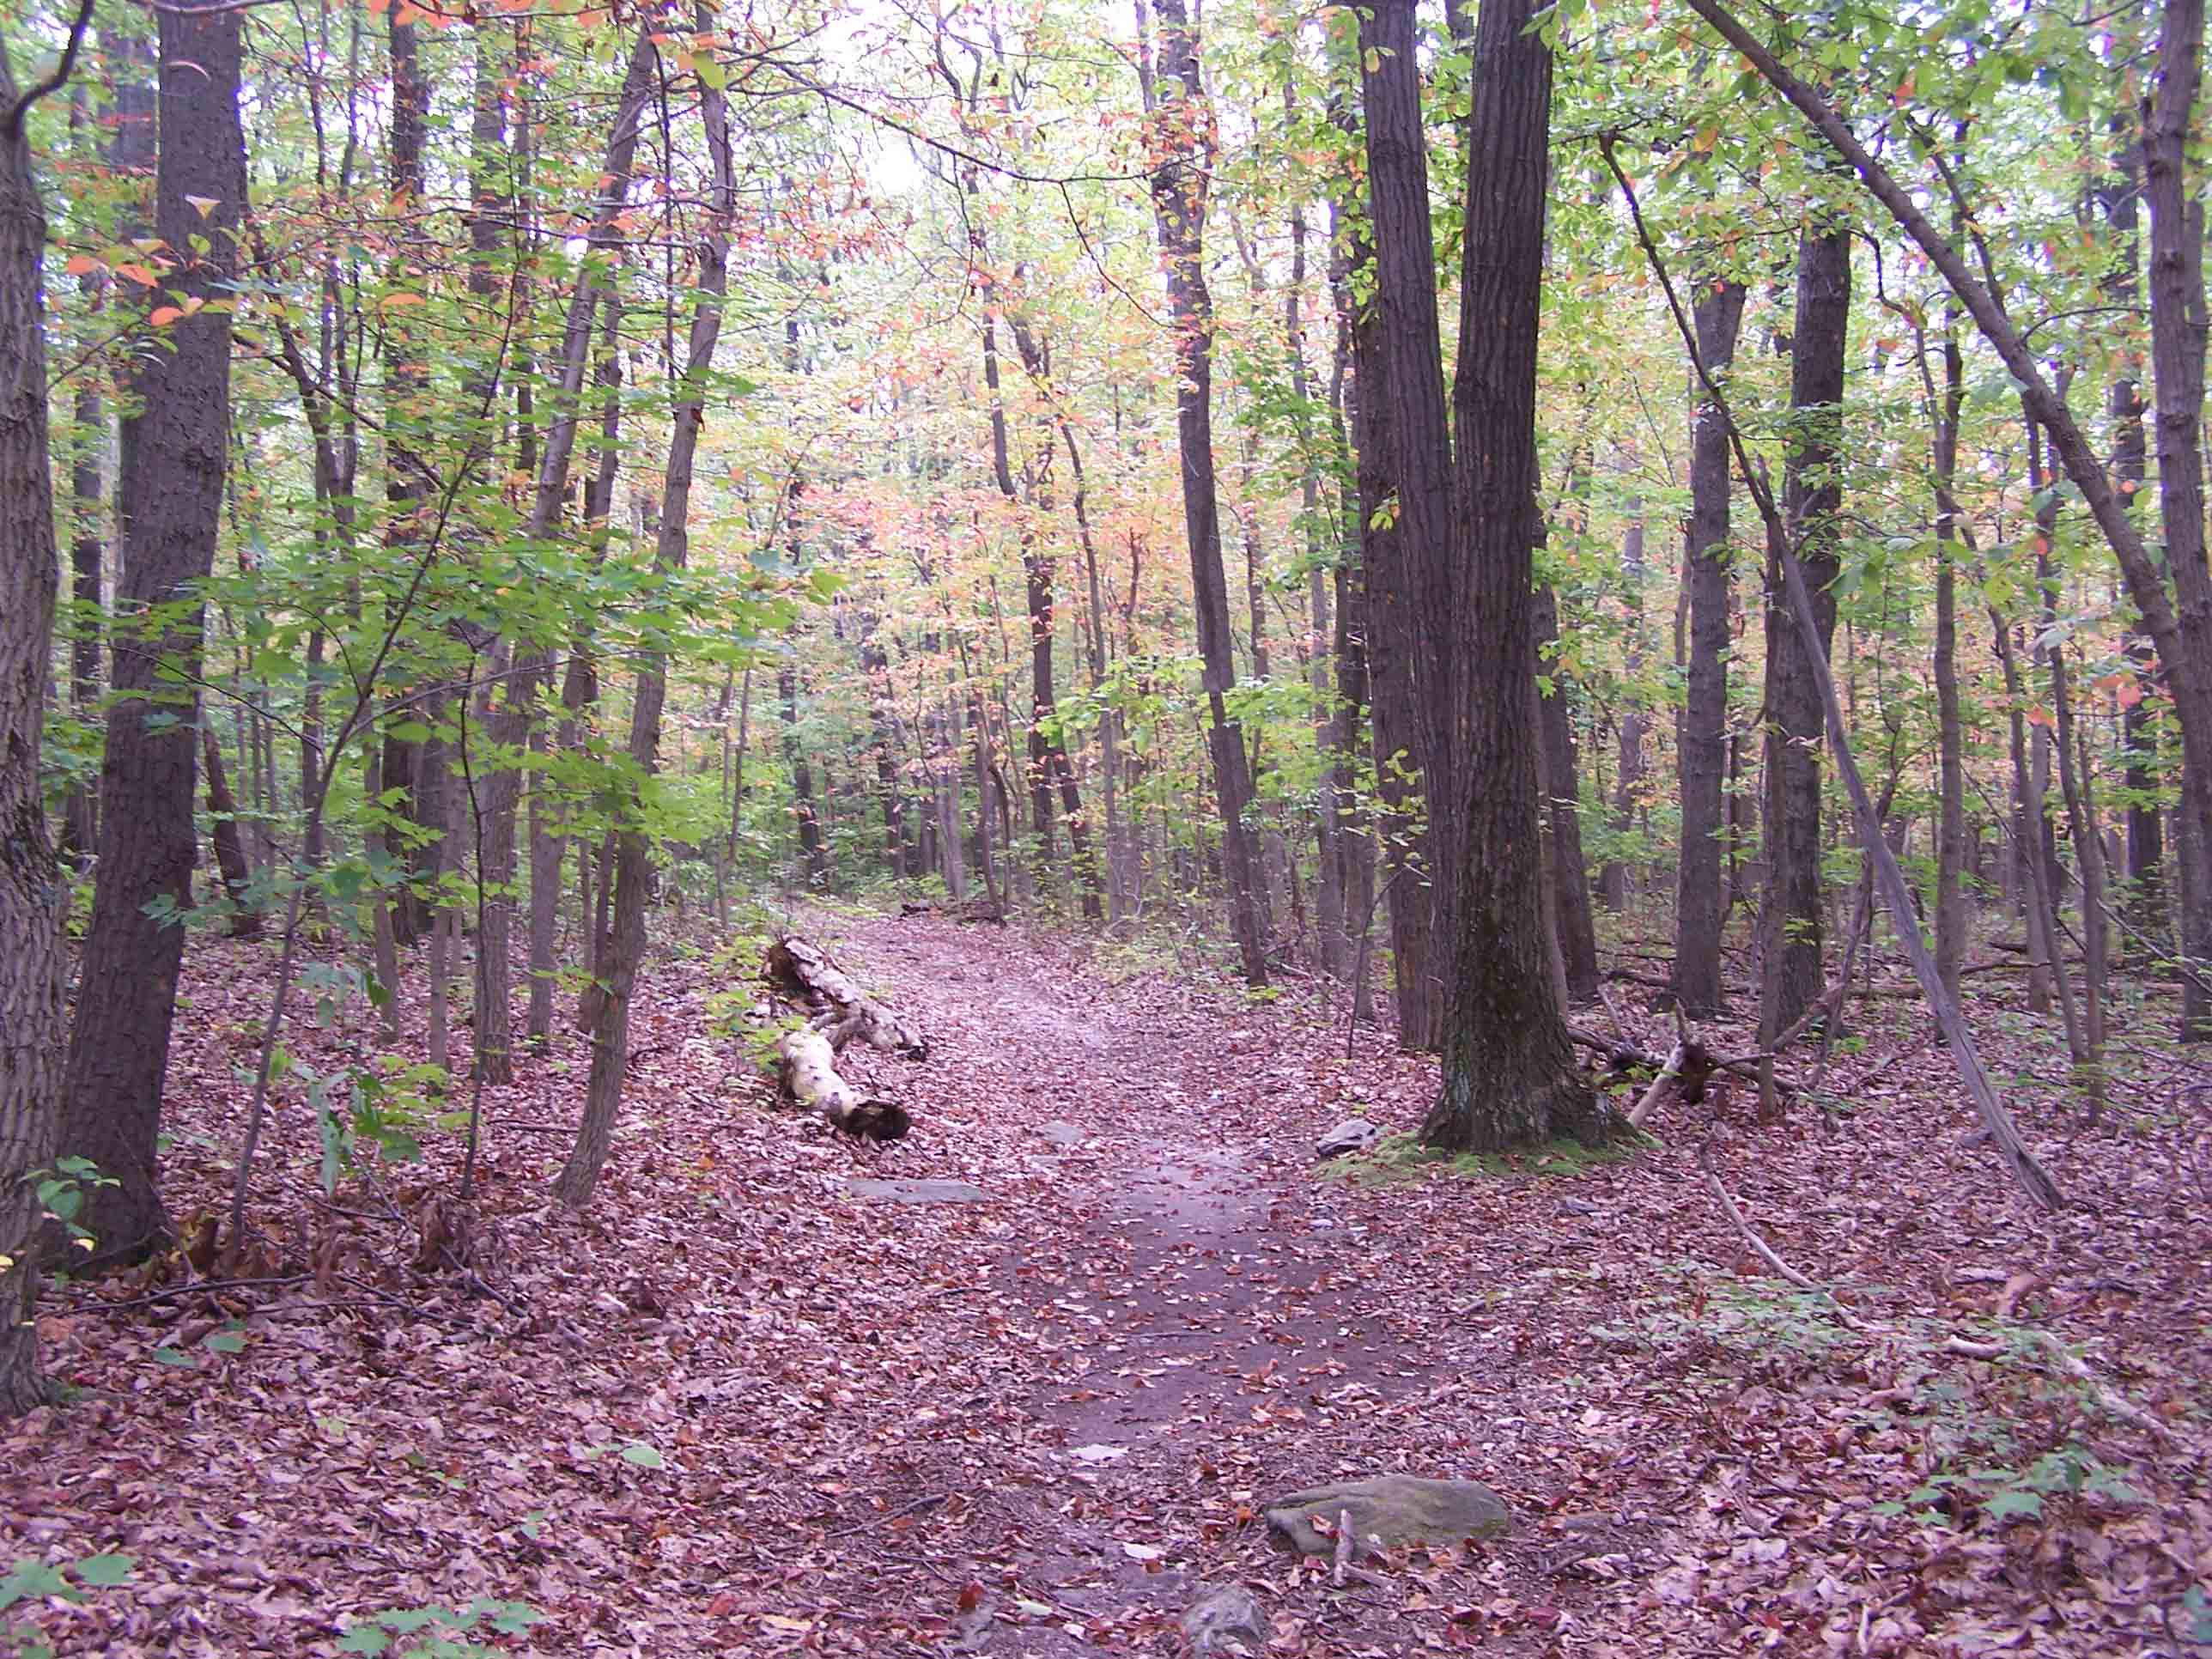 View of the Trail. Courtesy at@rohland.org